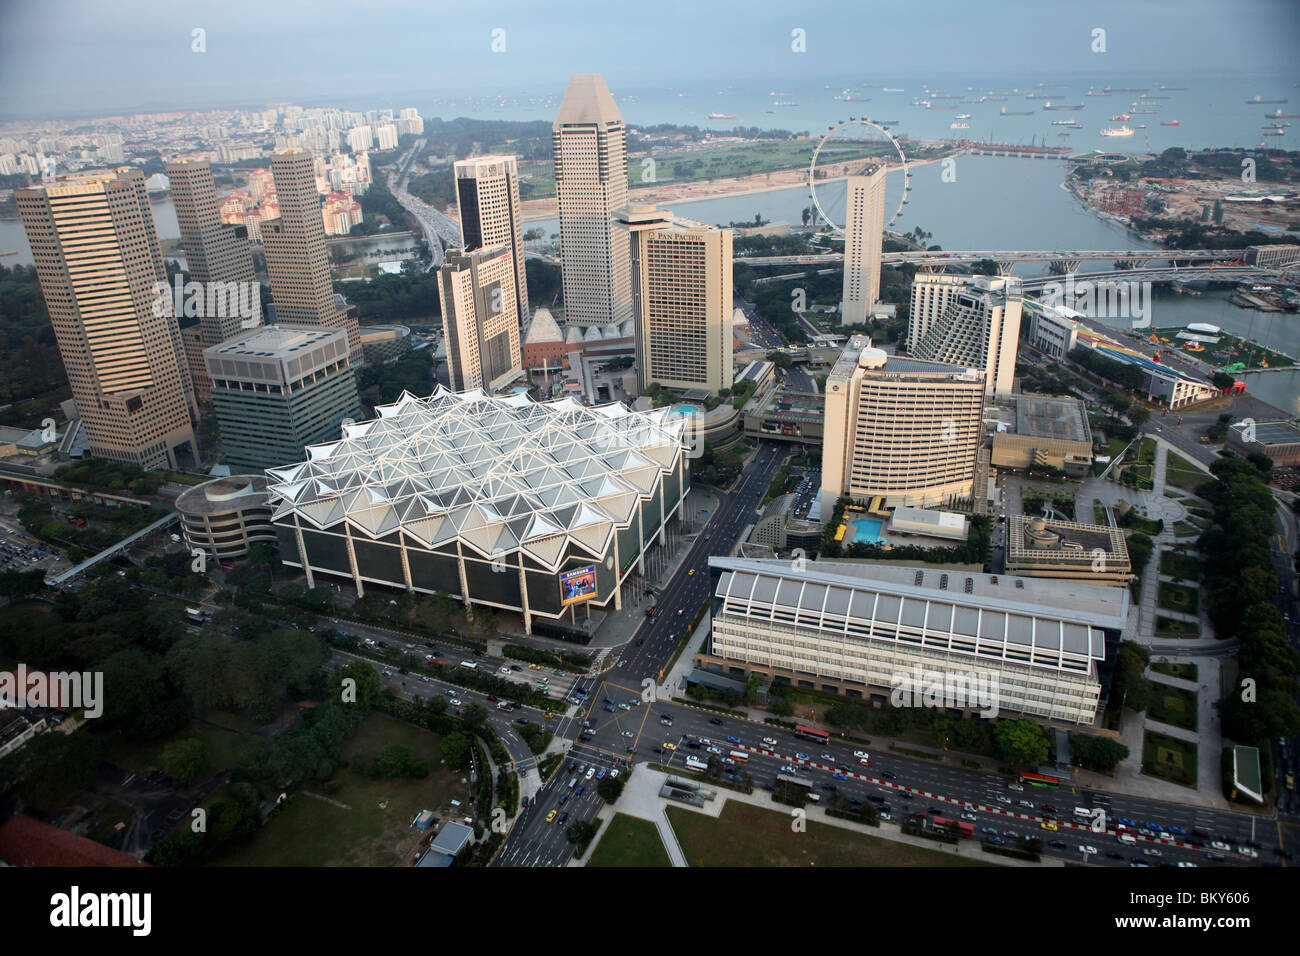 Aerial view of Singapore as seen from the Swissotel Stamford Hotel in Singapore. Stock Photo